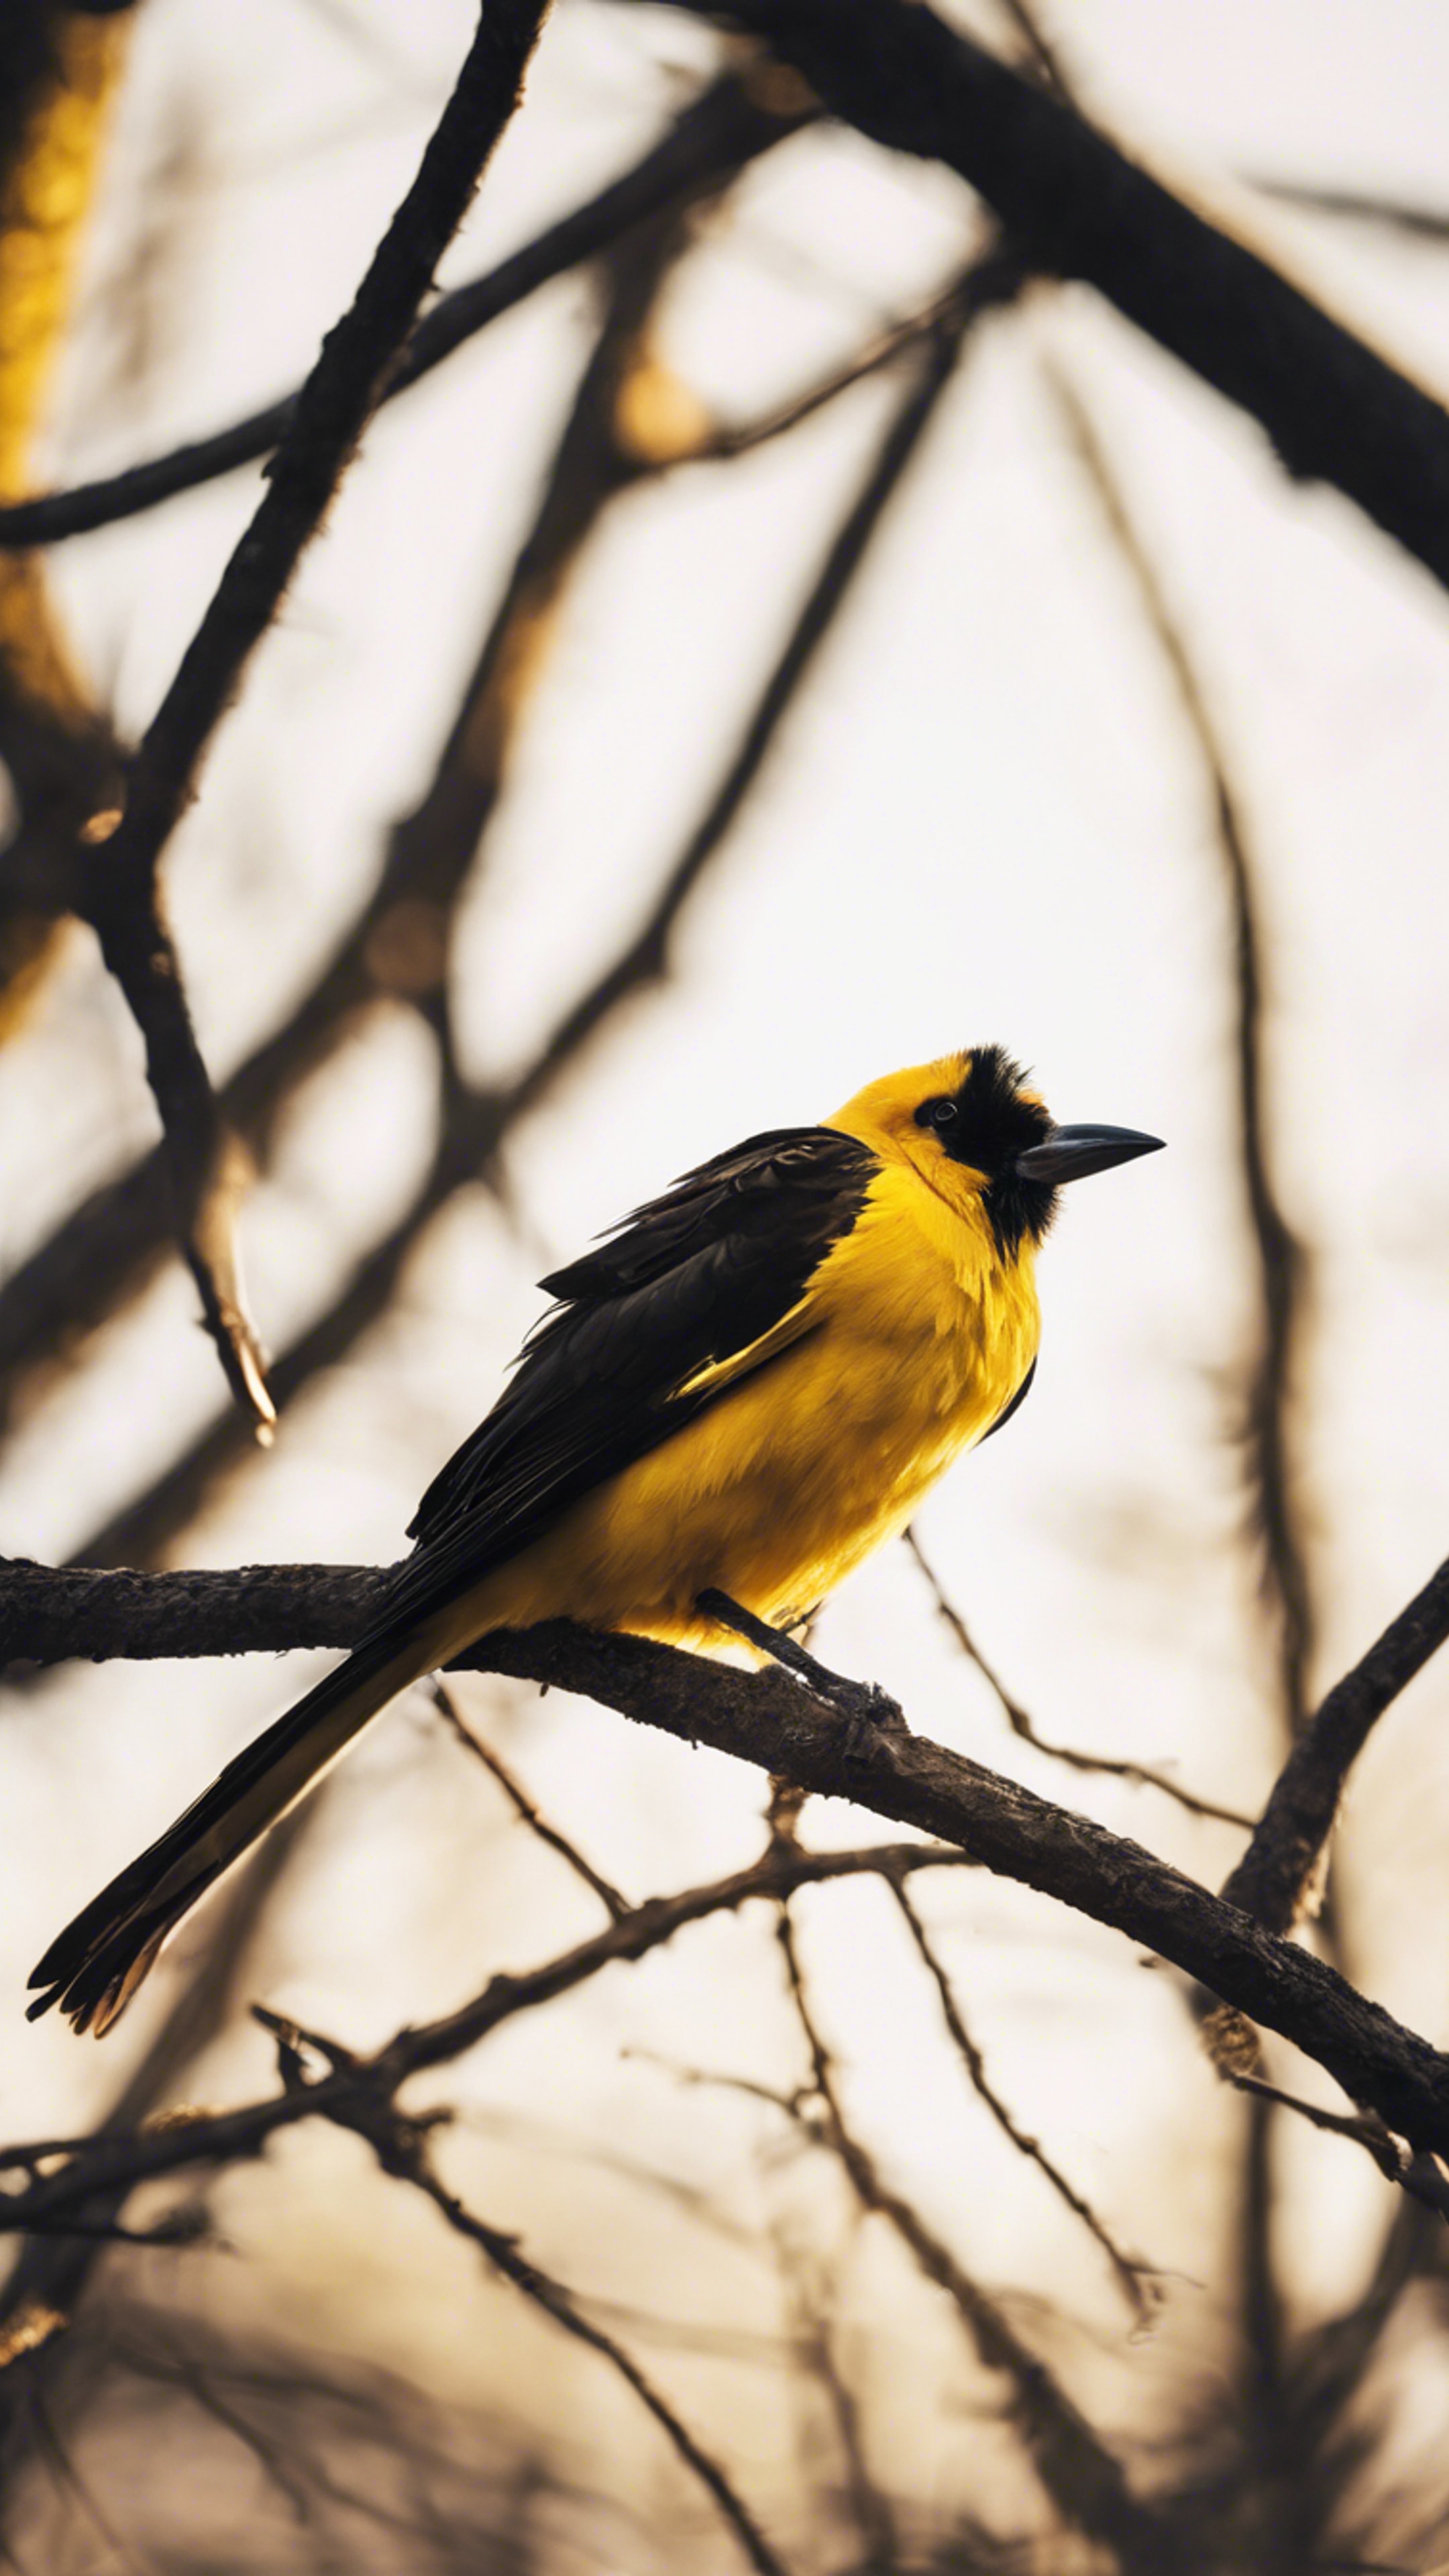 A yellow bird with dark black feathers perched on a sunlit branch.壁紙[3d028cc122884a34be99]